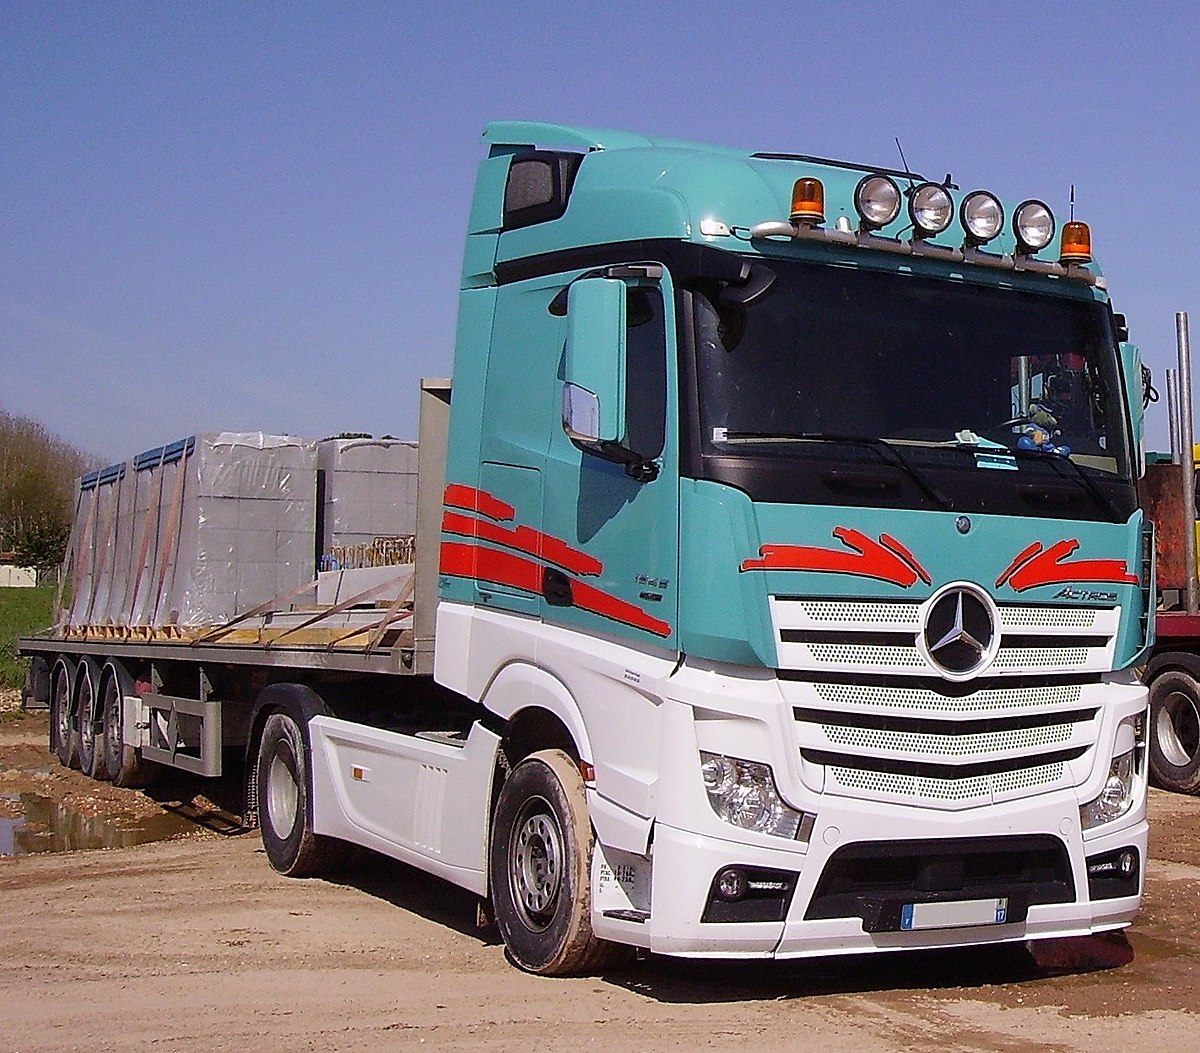 https://upload.wikimedia.org/wikipedia/commons/thumb/3/3f/Mercedes-Benz_Actros_1845.jpg/1200px-Mercedes-Benz_Actros_1845.jpg